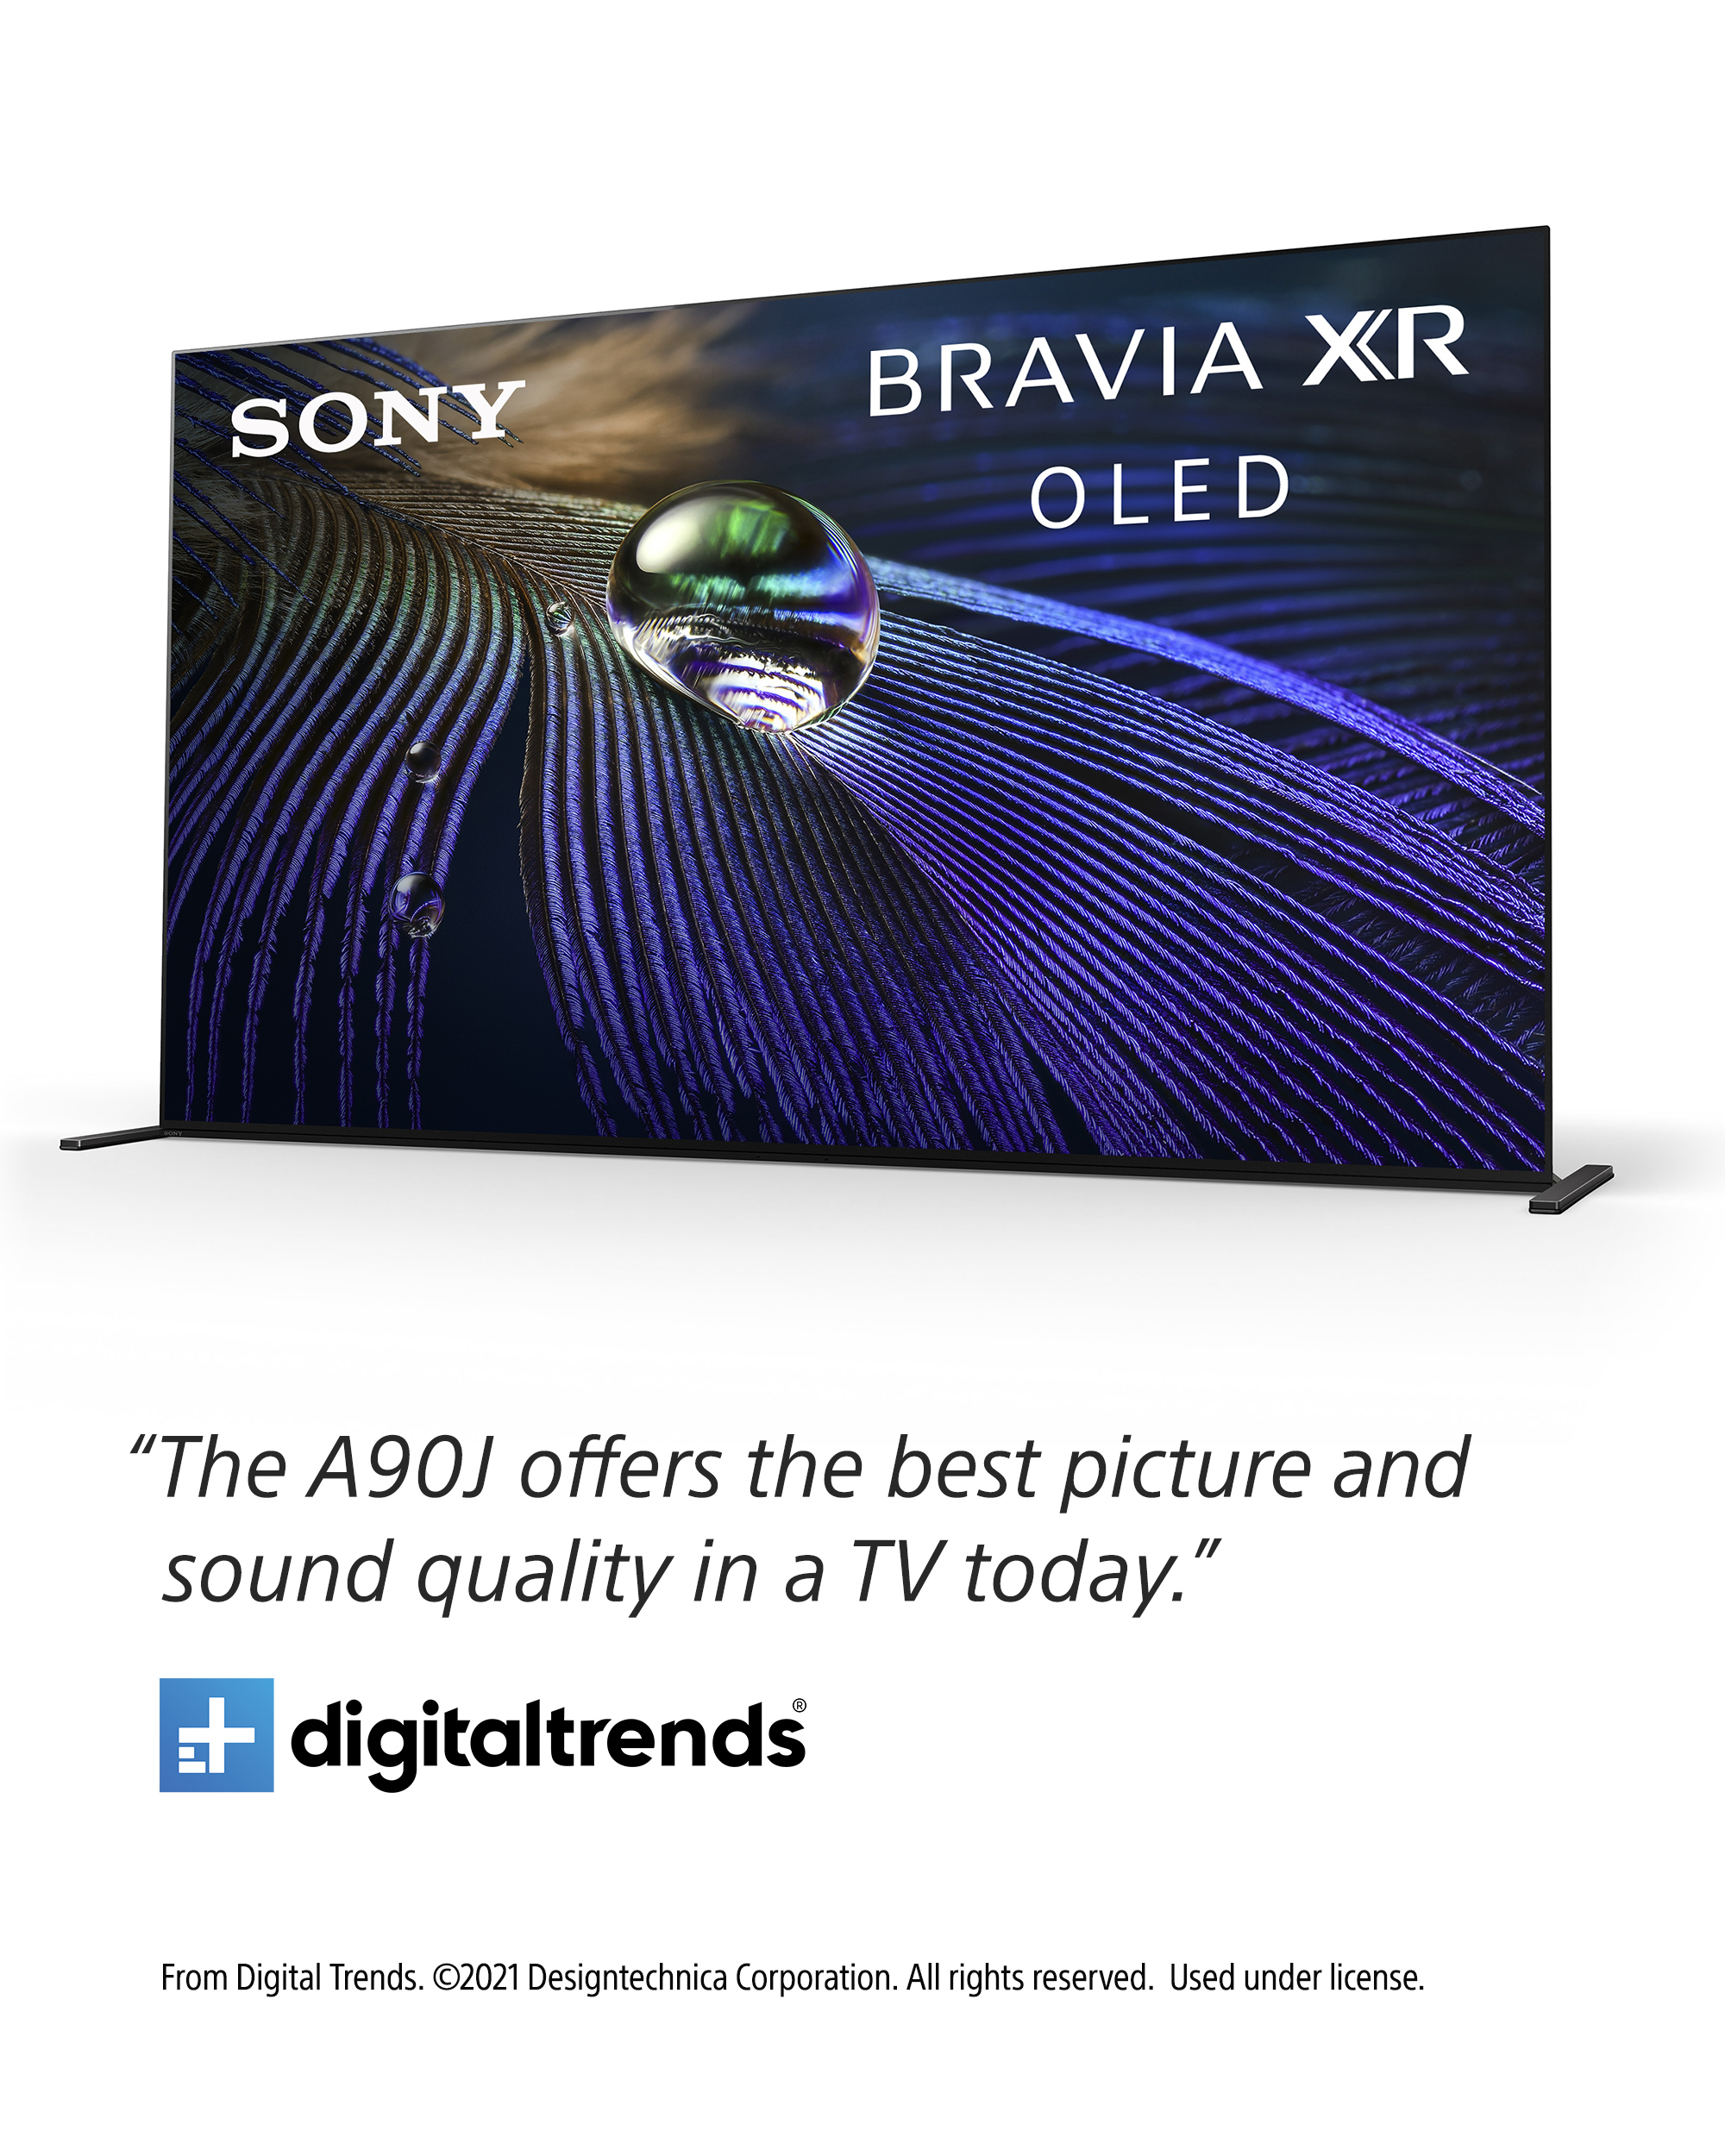 Sony XR55A90J 55" A90J Series BRAVIA XR OLED 4K UHD Smart TV with Dolby Vision HDR (2021) - image 5 of 21